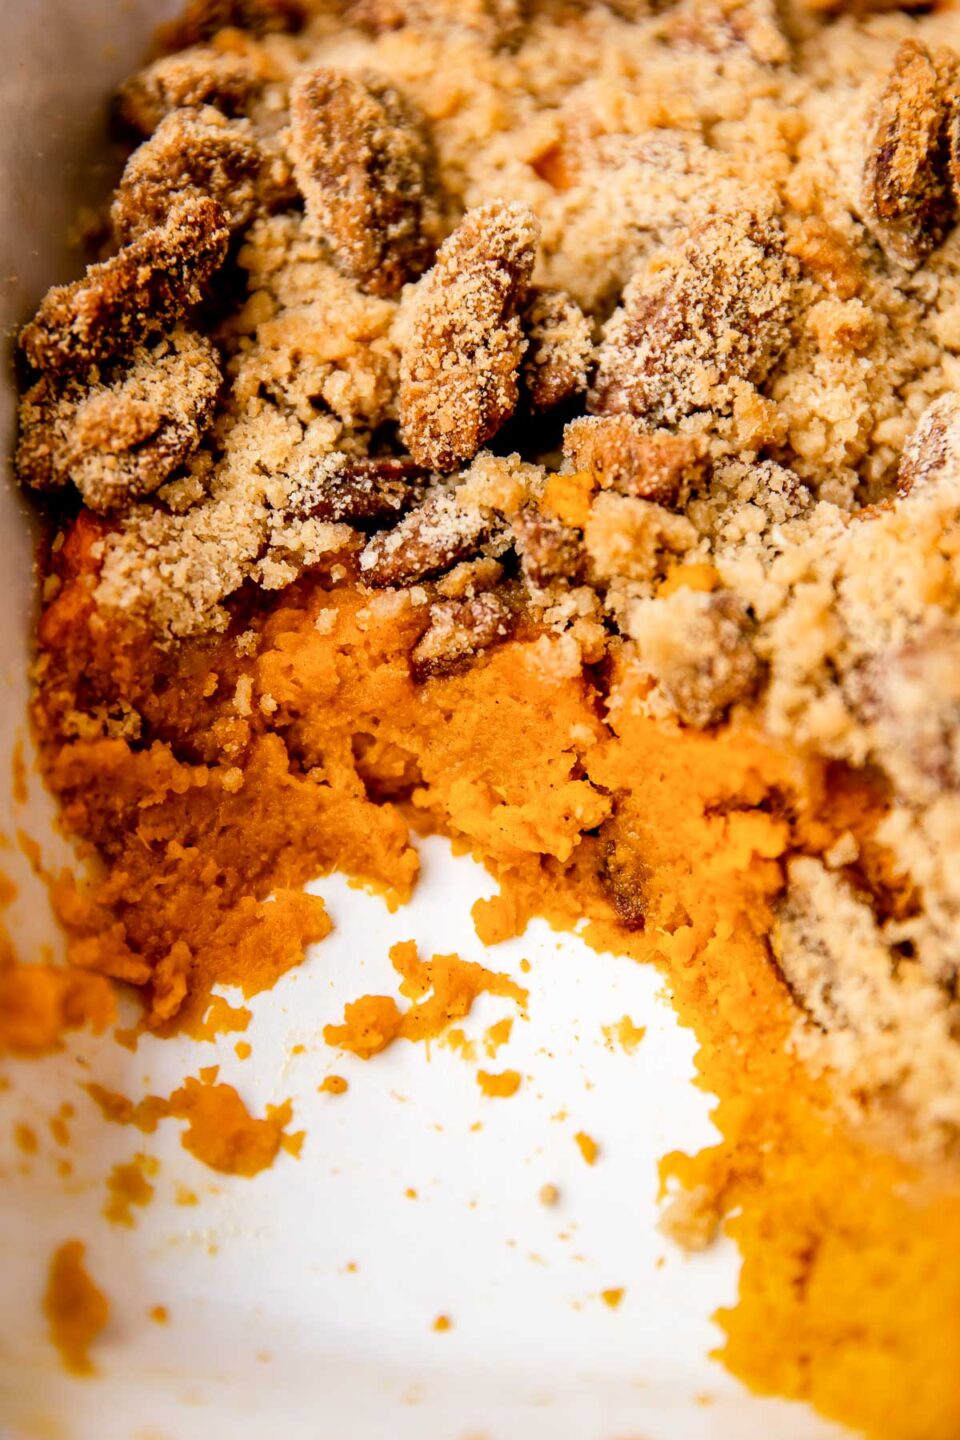 A close up and macro shot of the inside of make ahead thanksgiving sweet potato casserole inside of a large white baking dish. A portion of the make ahead sweet potato casserole has been dished out revealing the layers of sweet potato casserole filling topped with streusel and maple pecan topping.